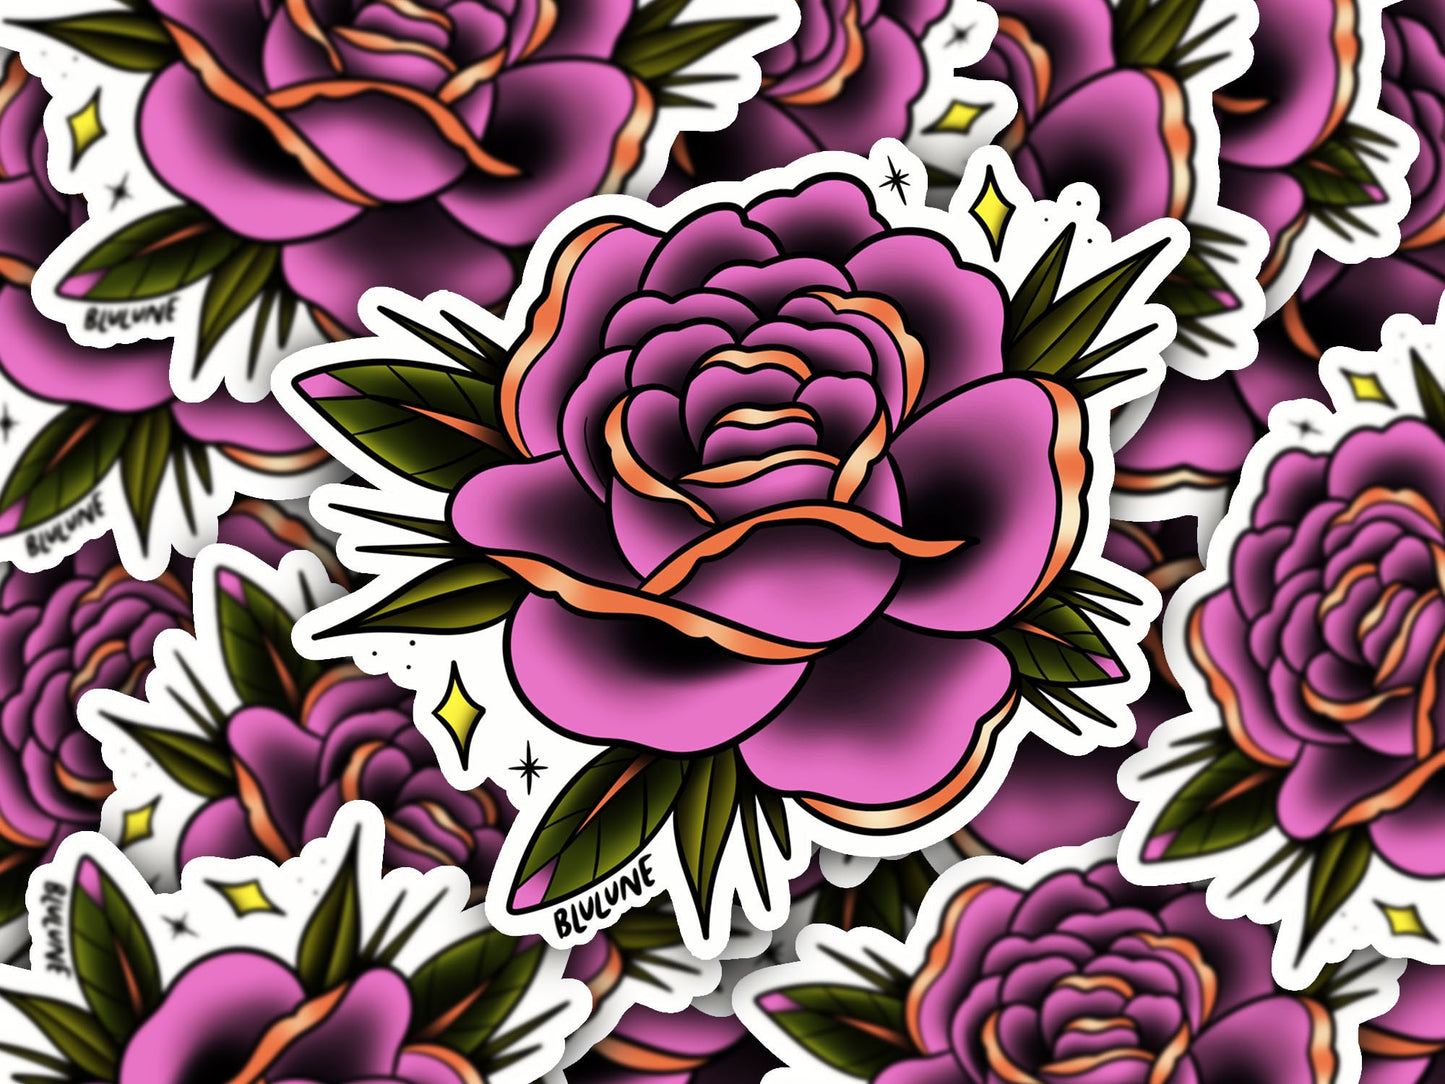 Tattoo Style Sticker Pack - Roses - Red, Pink and Mauve